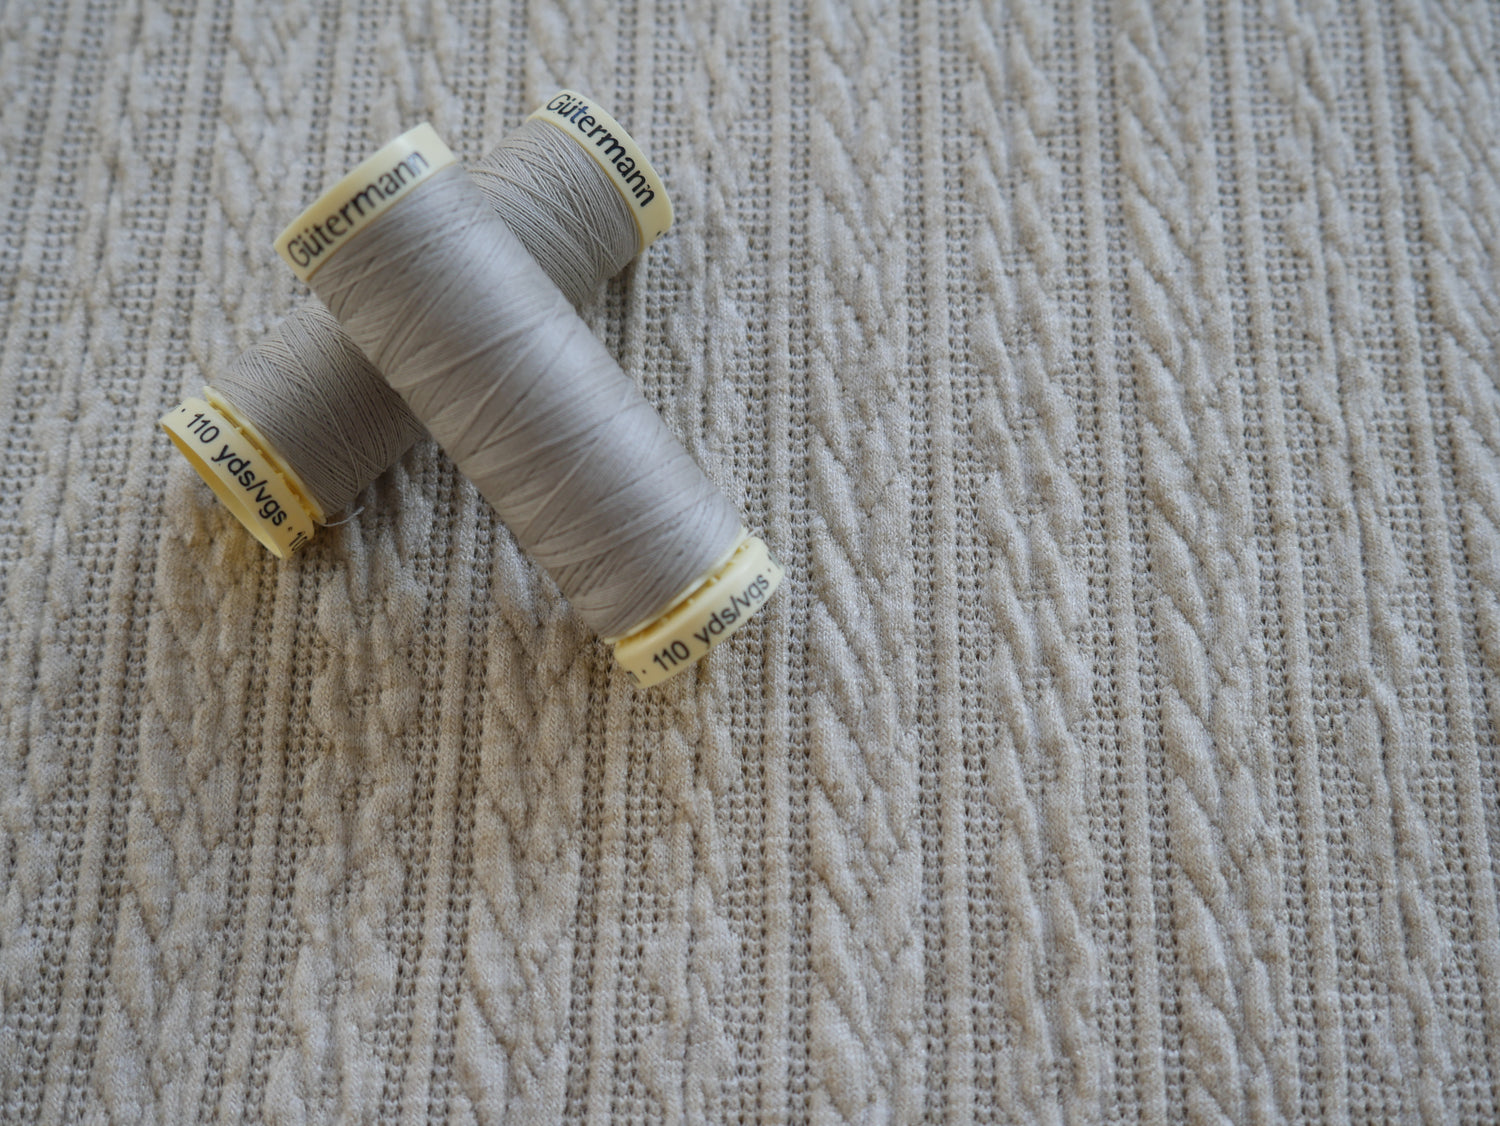 Cable Jacquard Knit Fabric in Sand £19.00-Jersey Fabric-Flying Bobbins Haberdashery